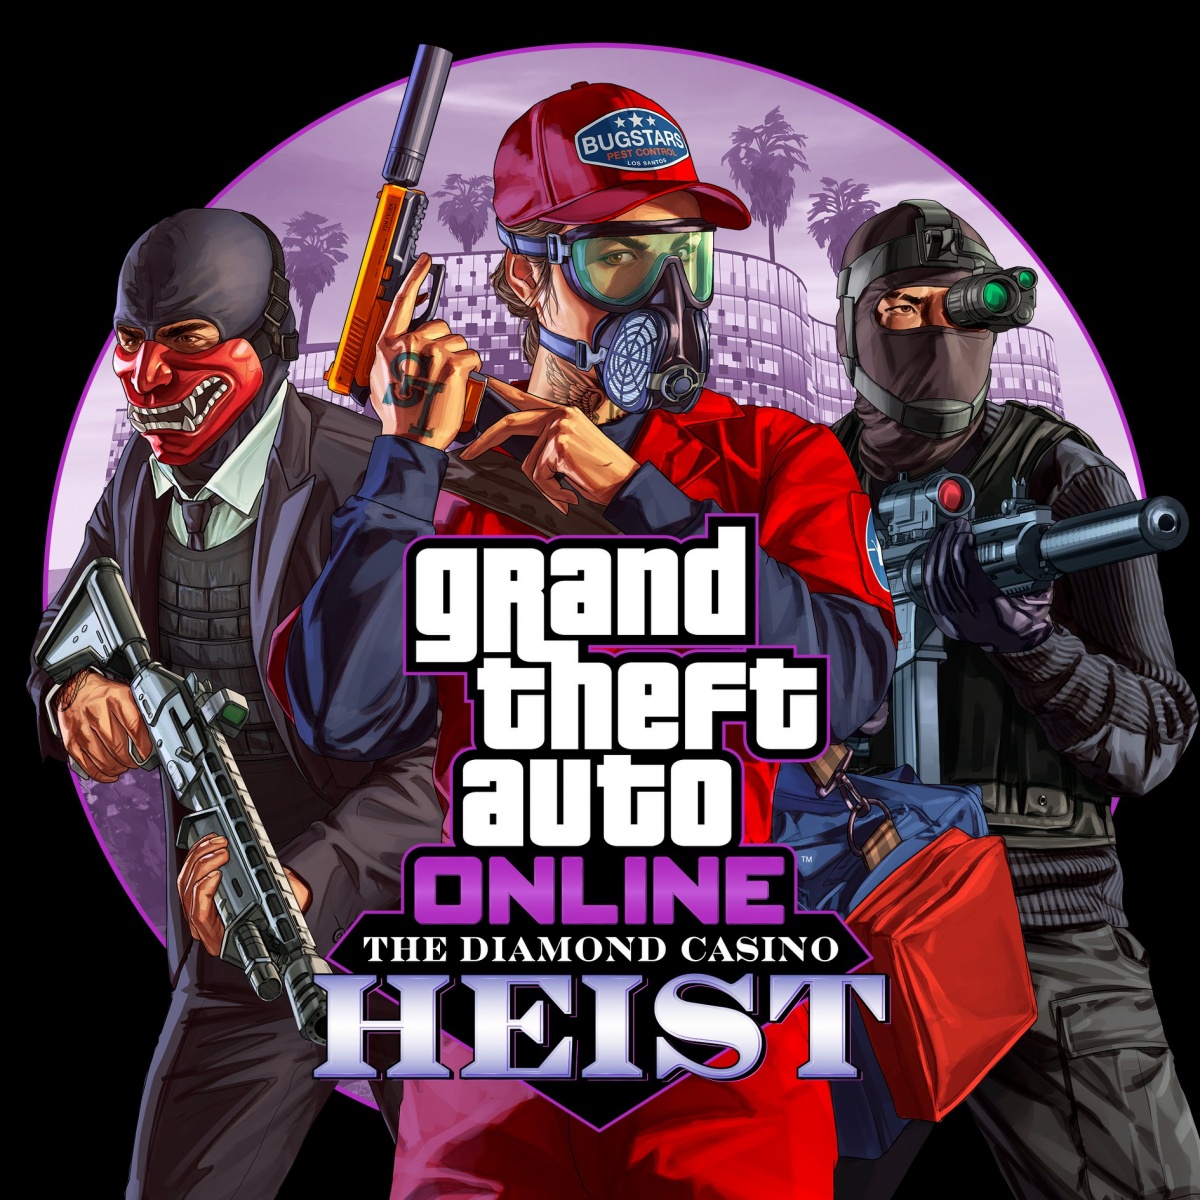 GTA Online Hackers are Back After GTA 5 was Offered Free on Epic Games